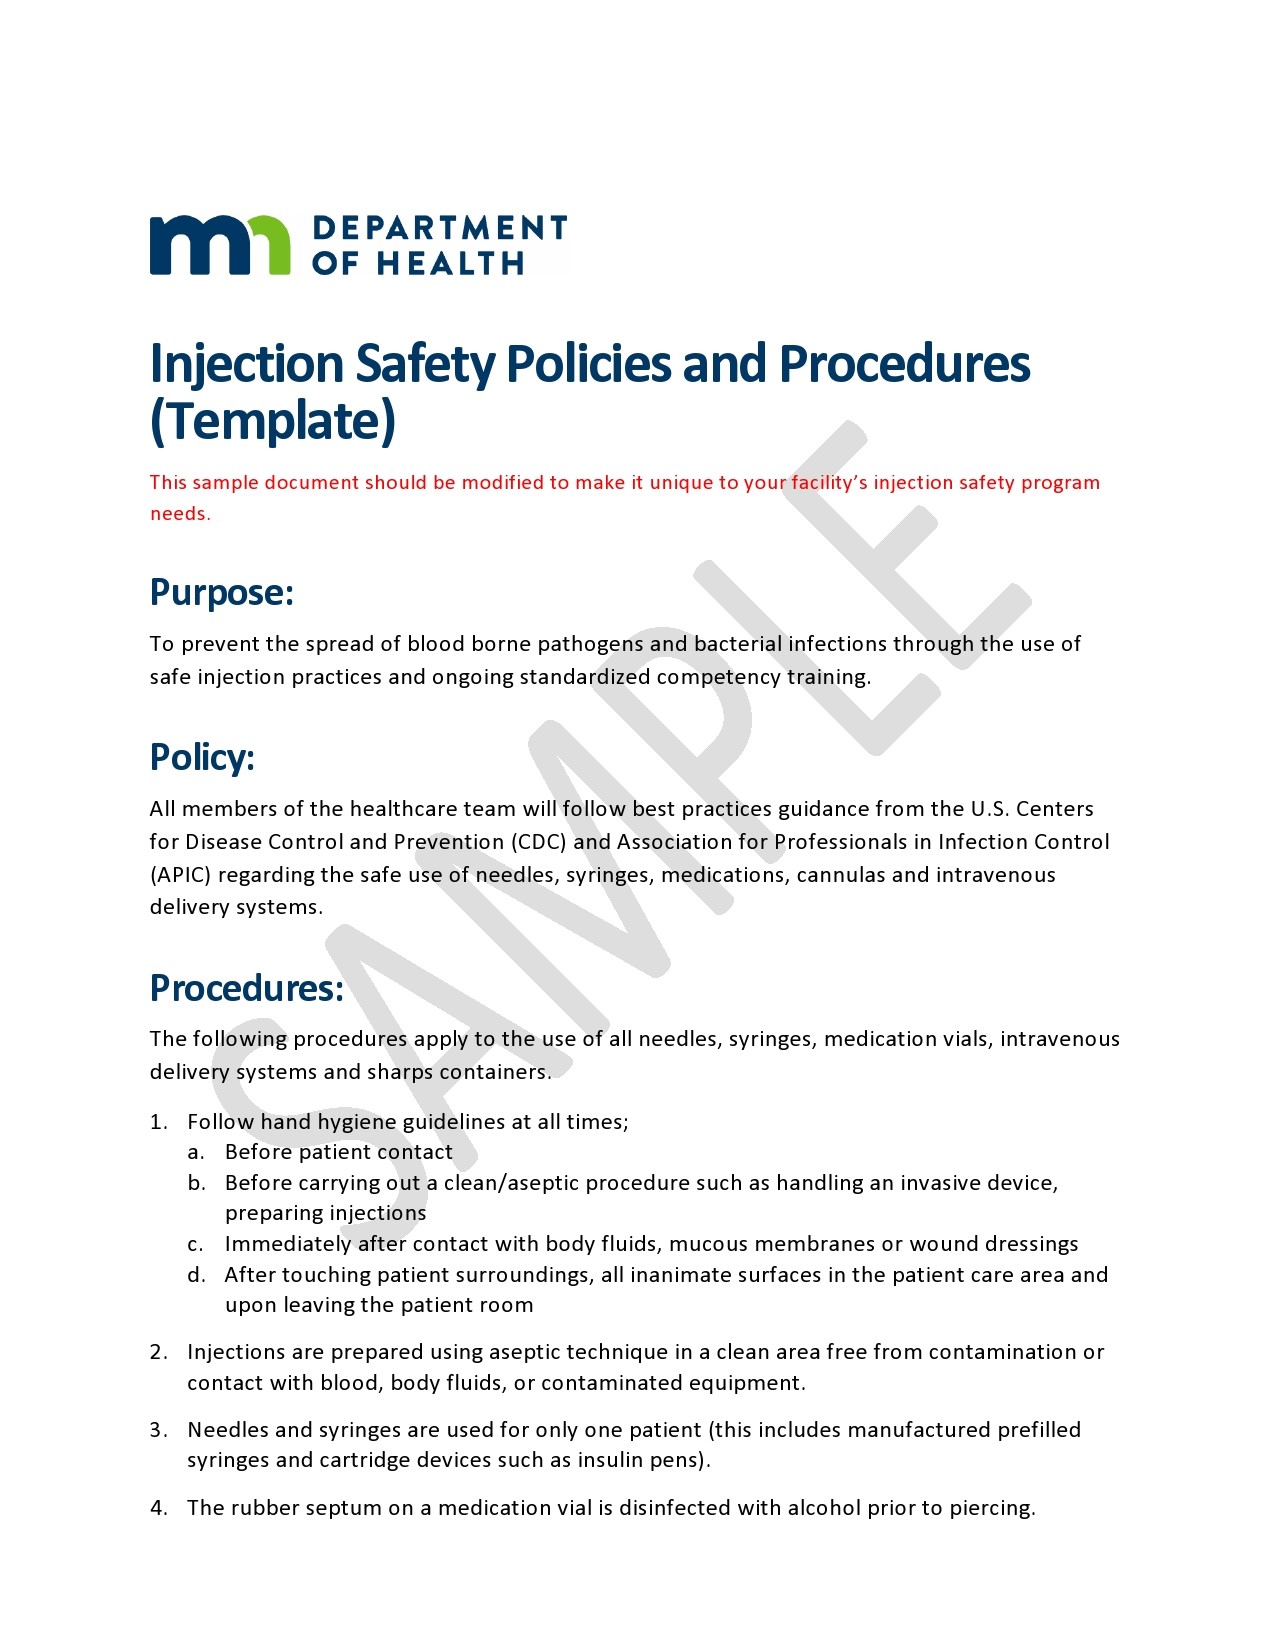 50 Free Policy And Procedure Templates (& Manuals) ᐅ TemplateLab